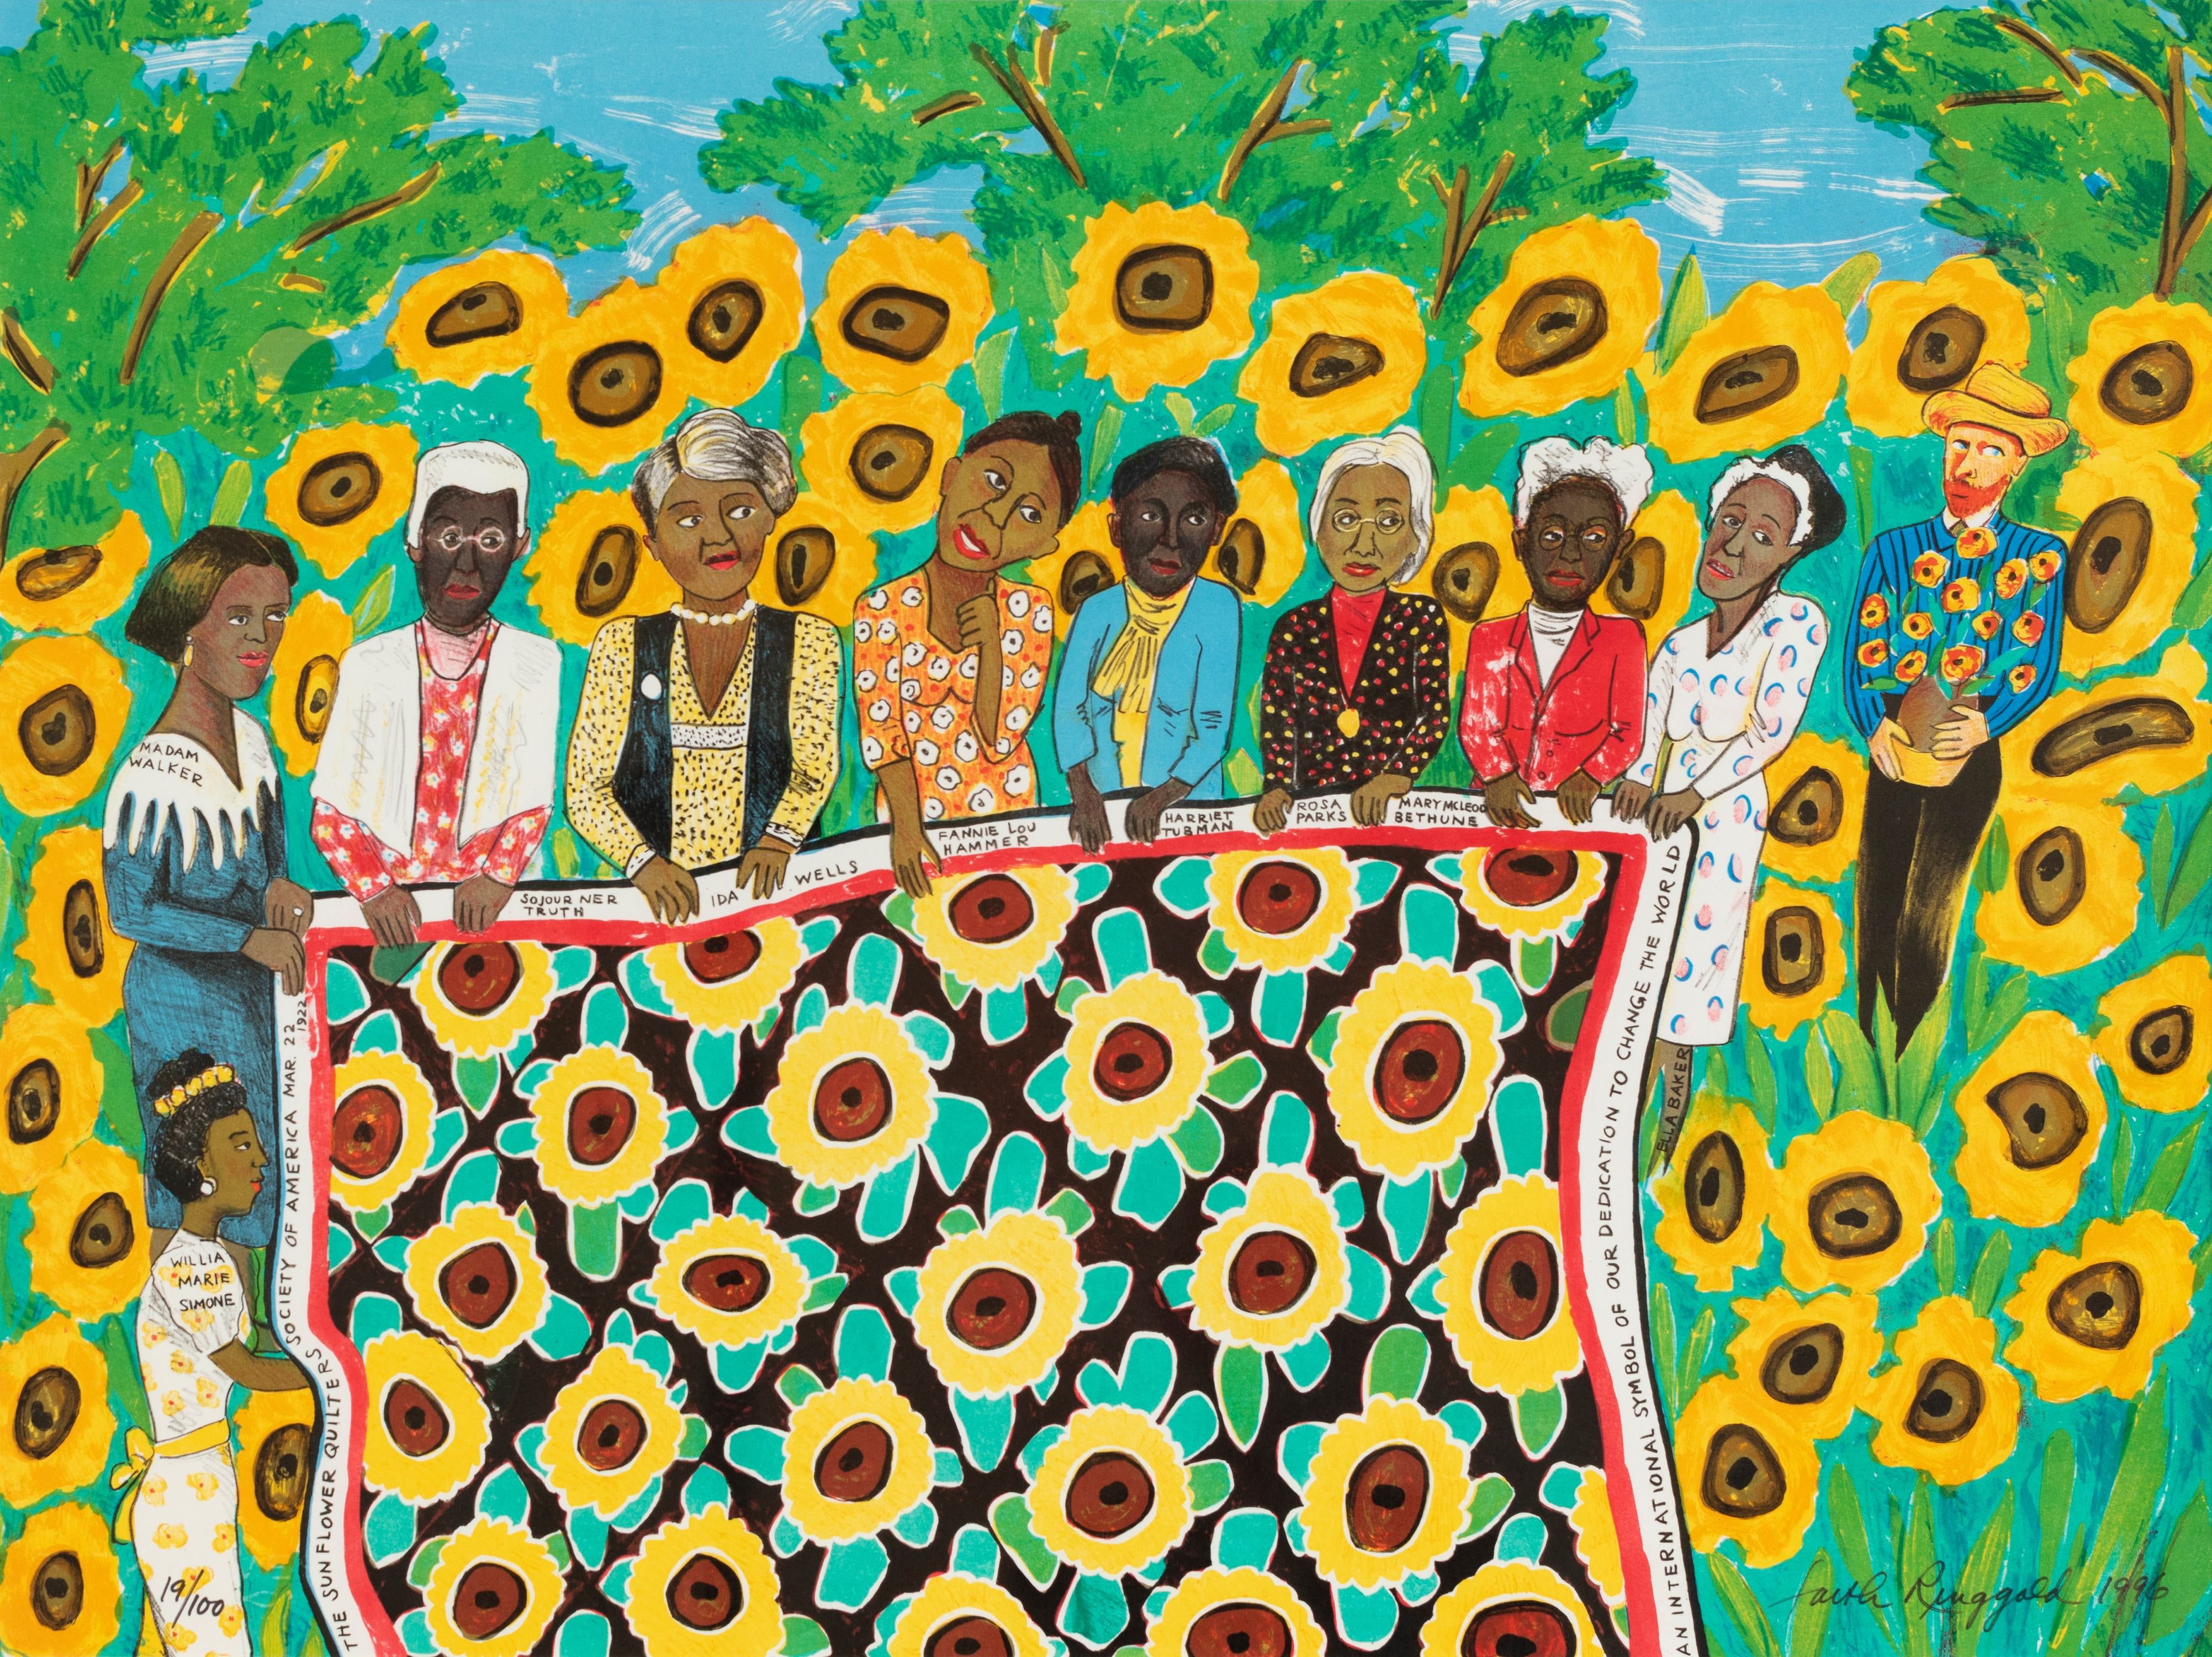 "The Sunflower Quilting Bee at Arles" by Faith Ringgold